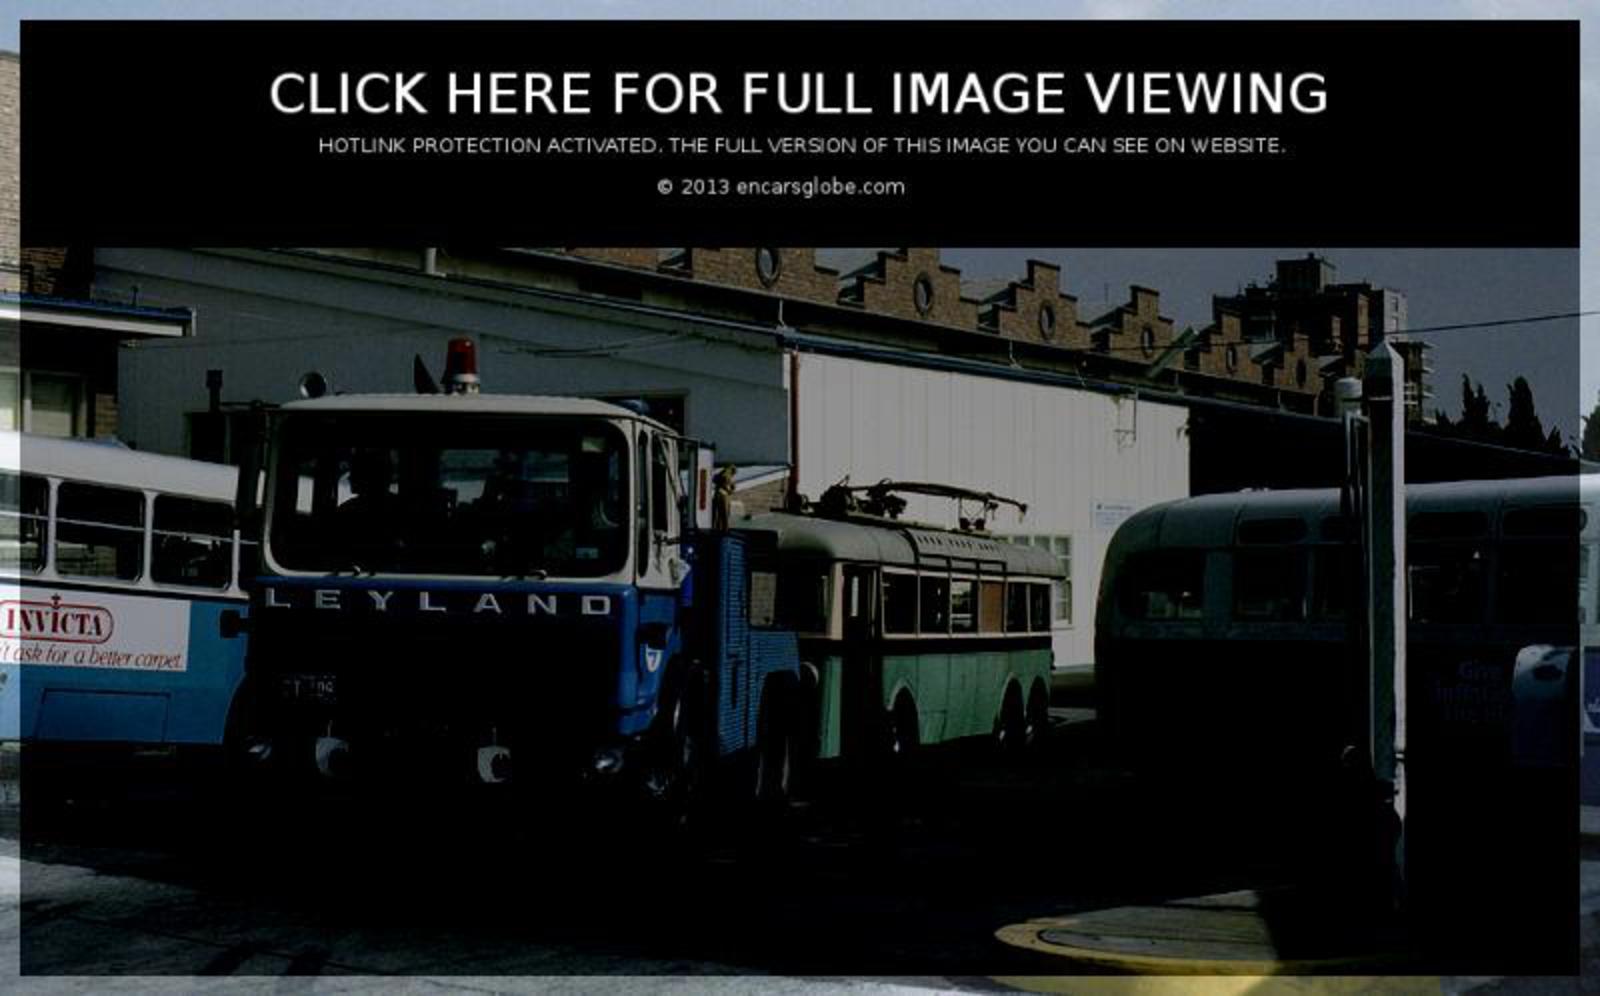 Leyland Trolley Bus : Photo gallery, complete information about ...